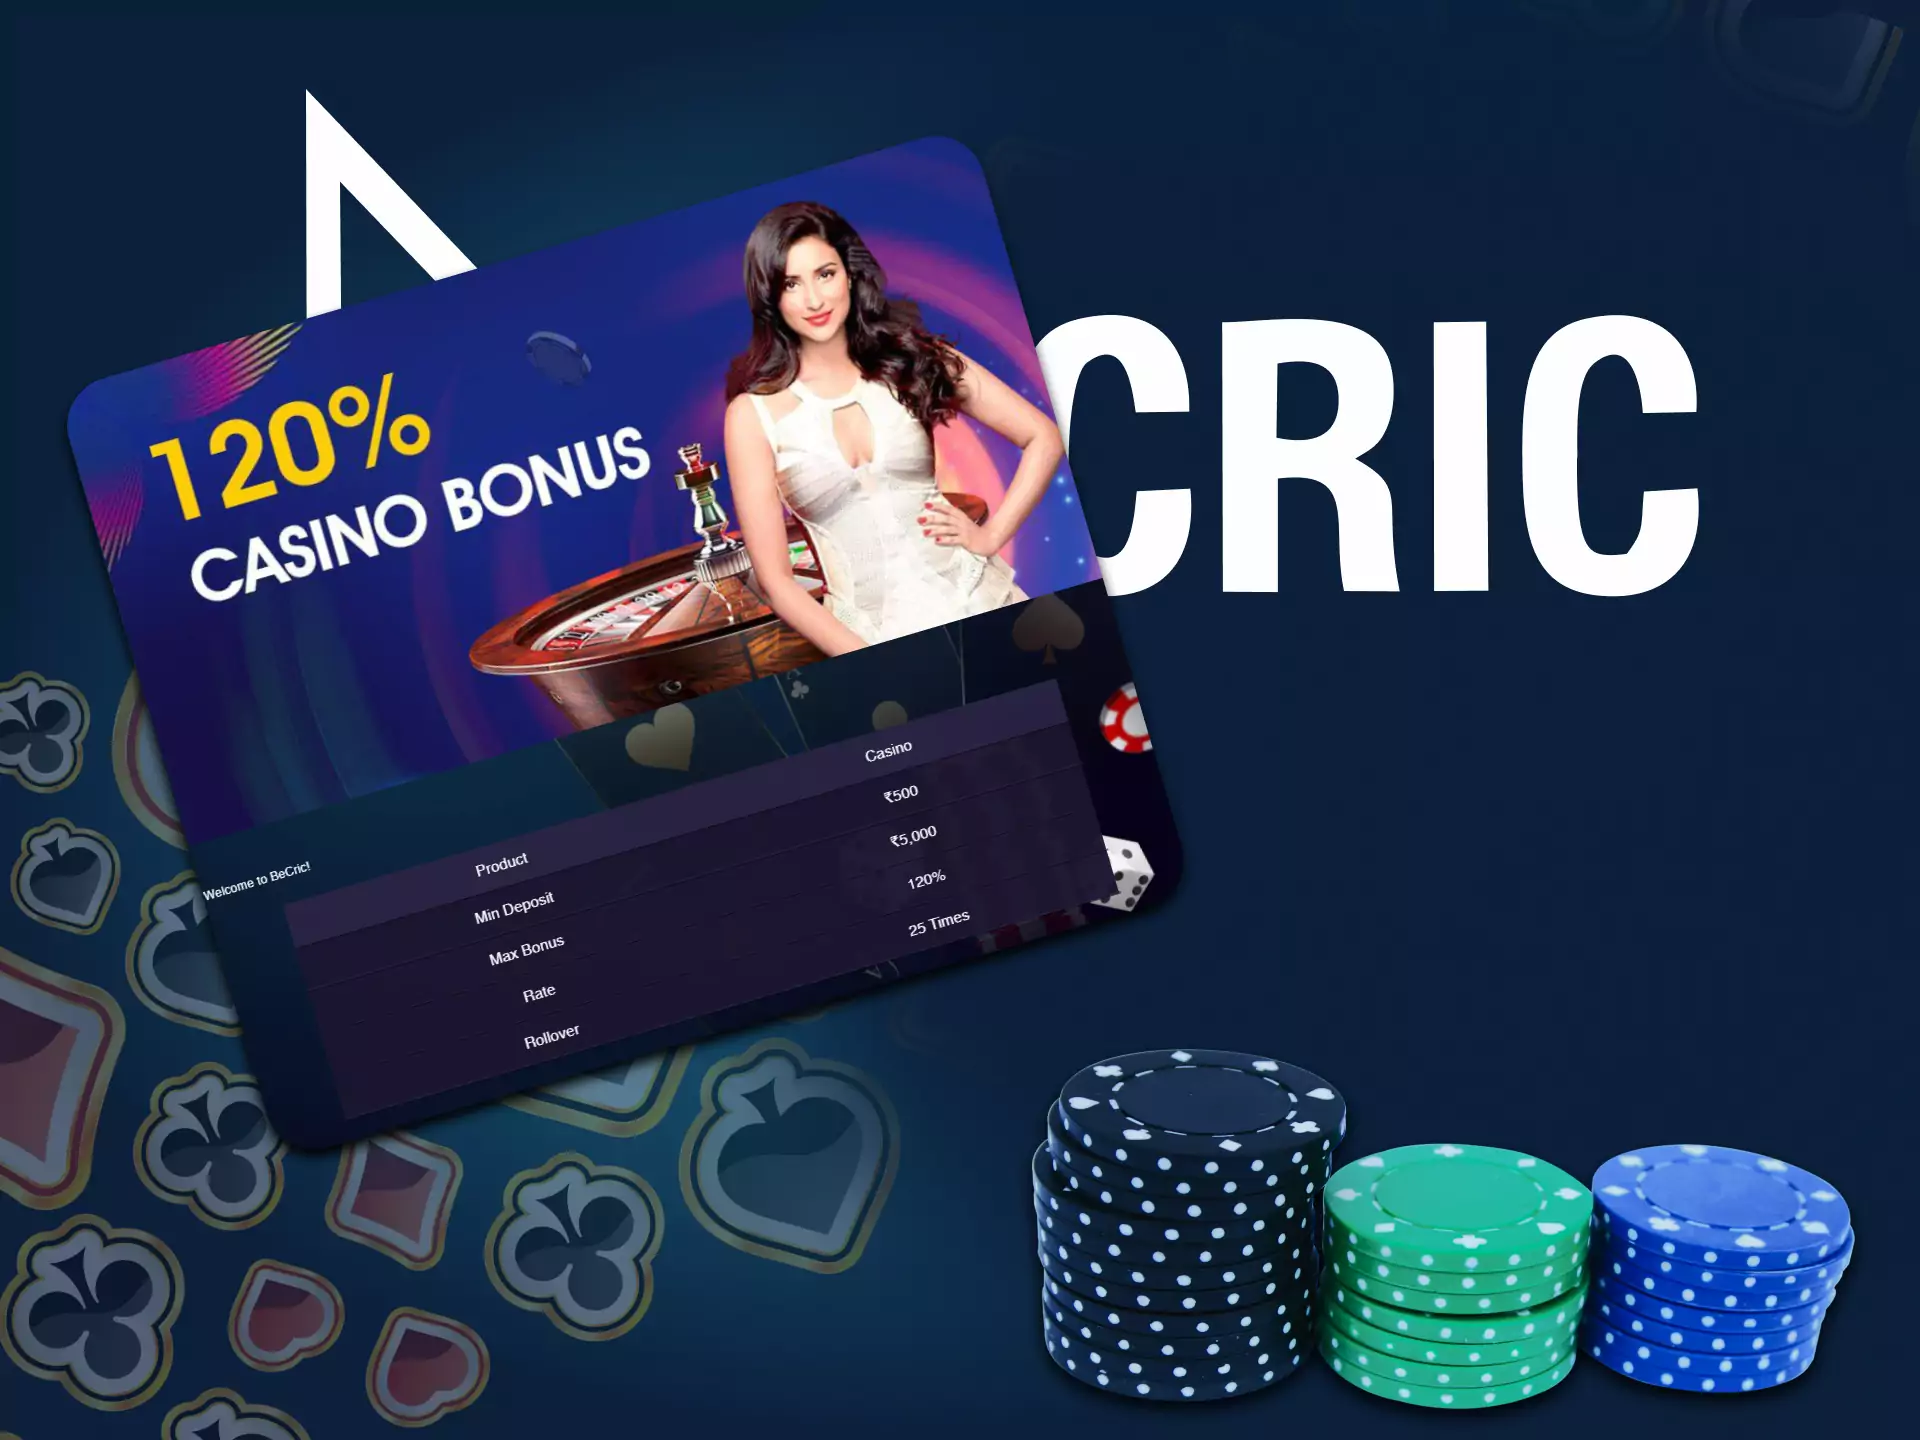 Users of Becric can also get a bonus on playing games in the casino section.